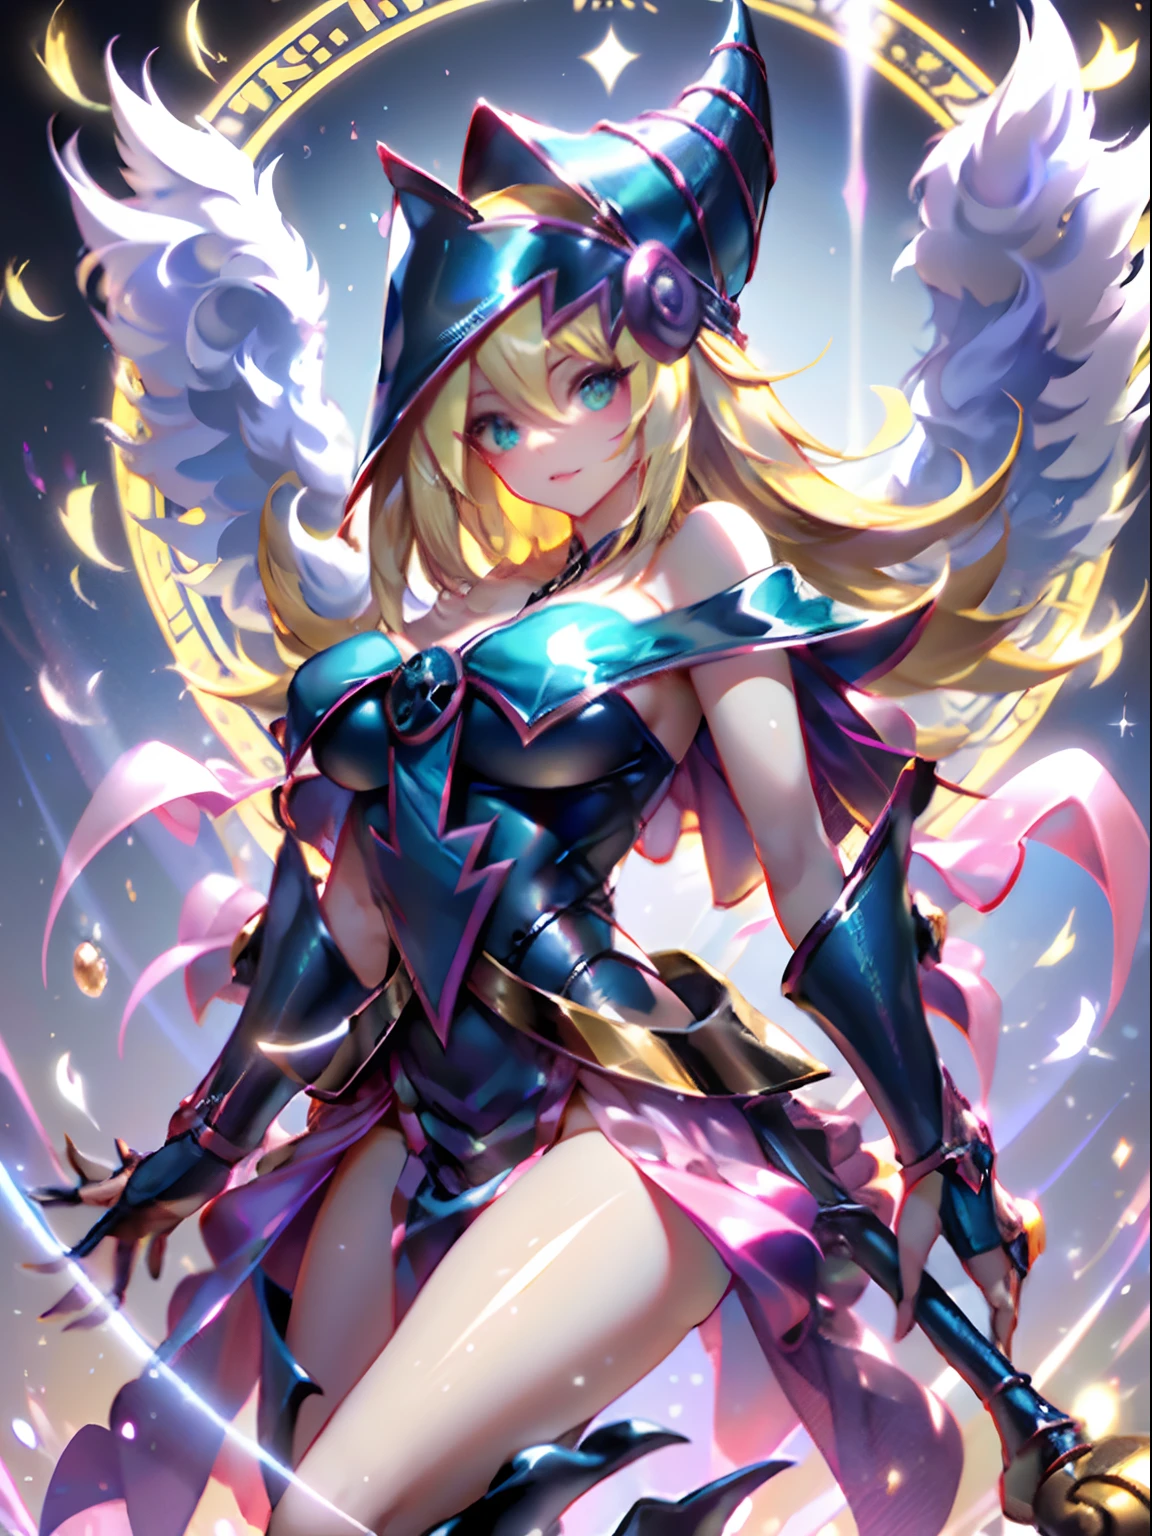 1 dark magician woman:2 Celestial angel version:1 spreading its wings:3 with a white feather coat, Full back wings, radiant halo, Long flowing hair, Mechanical wings dancing delicately at the waist, Medium figure, sunken navel, curtains of white feathers in the pelvis moving slightly, mini wings dotting the body, multiple wings that emit a yellow glow, soft yellow fire between the wings. Beautiful dark magician girl celestial angel version.